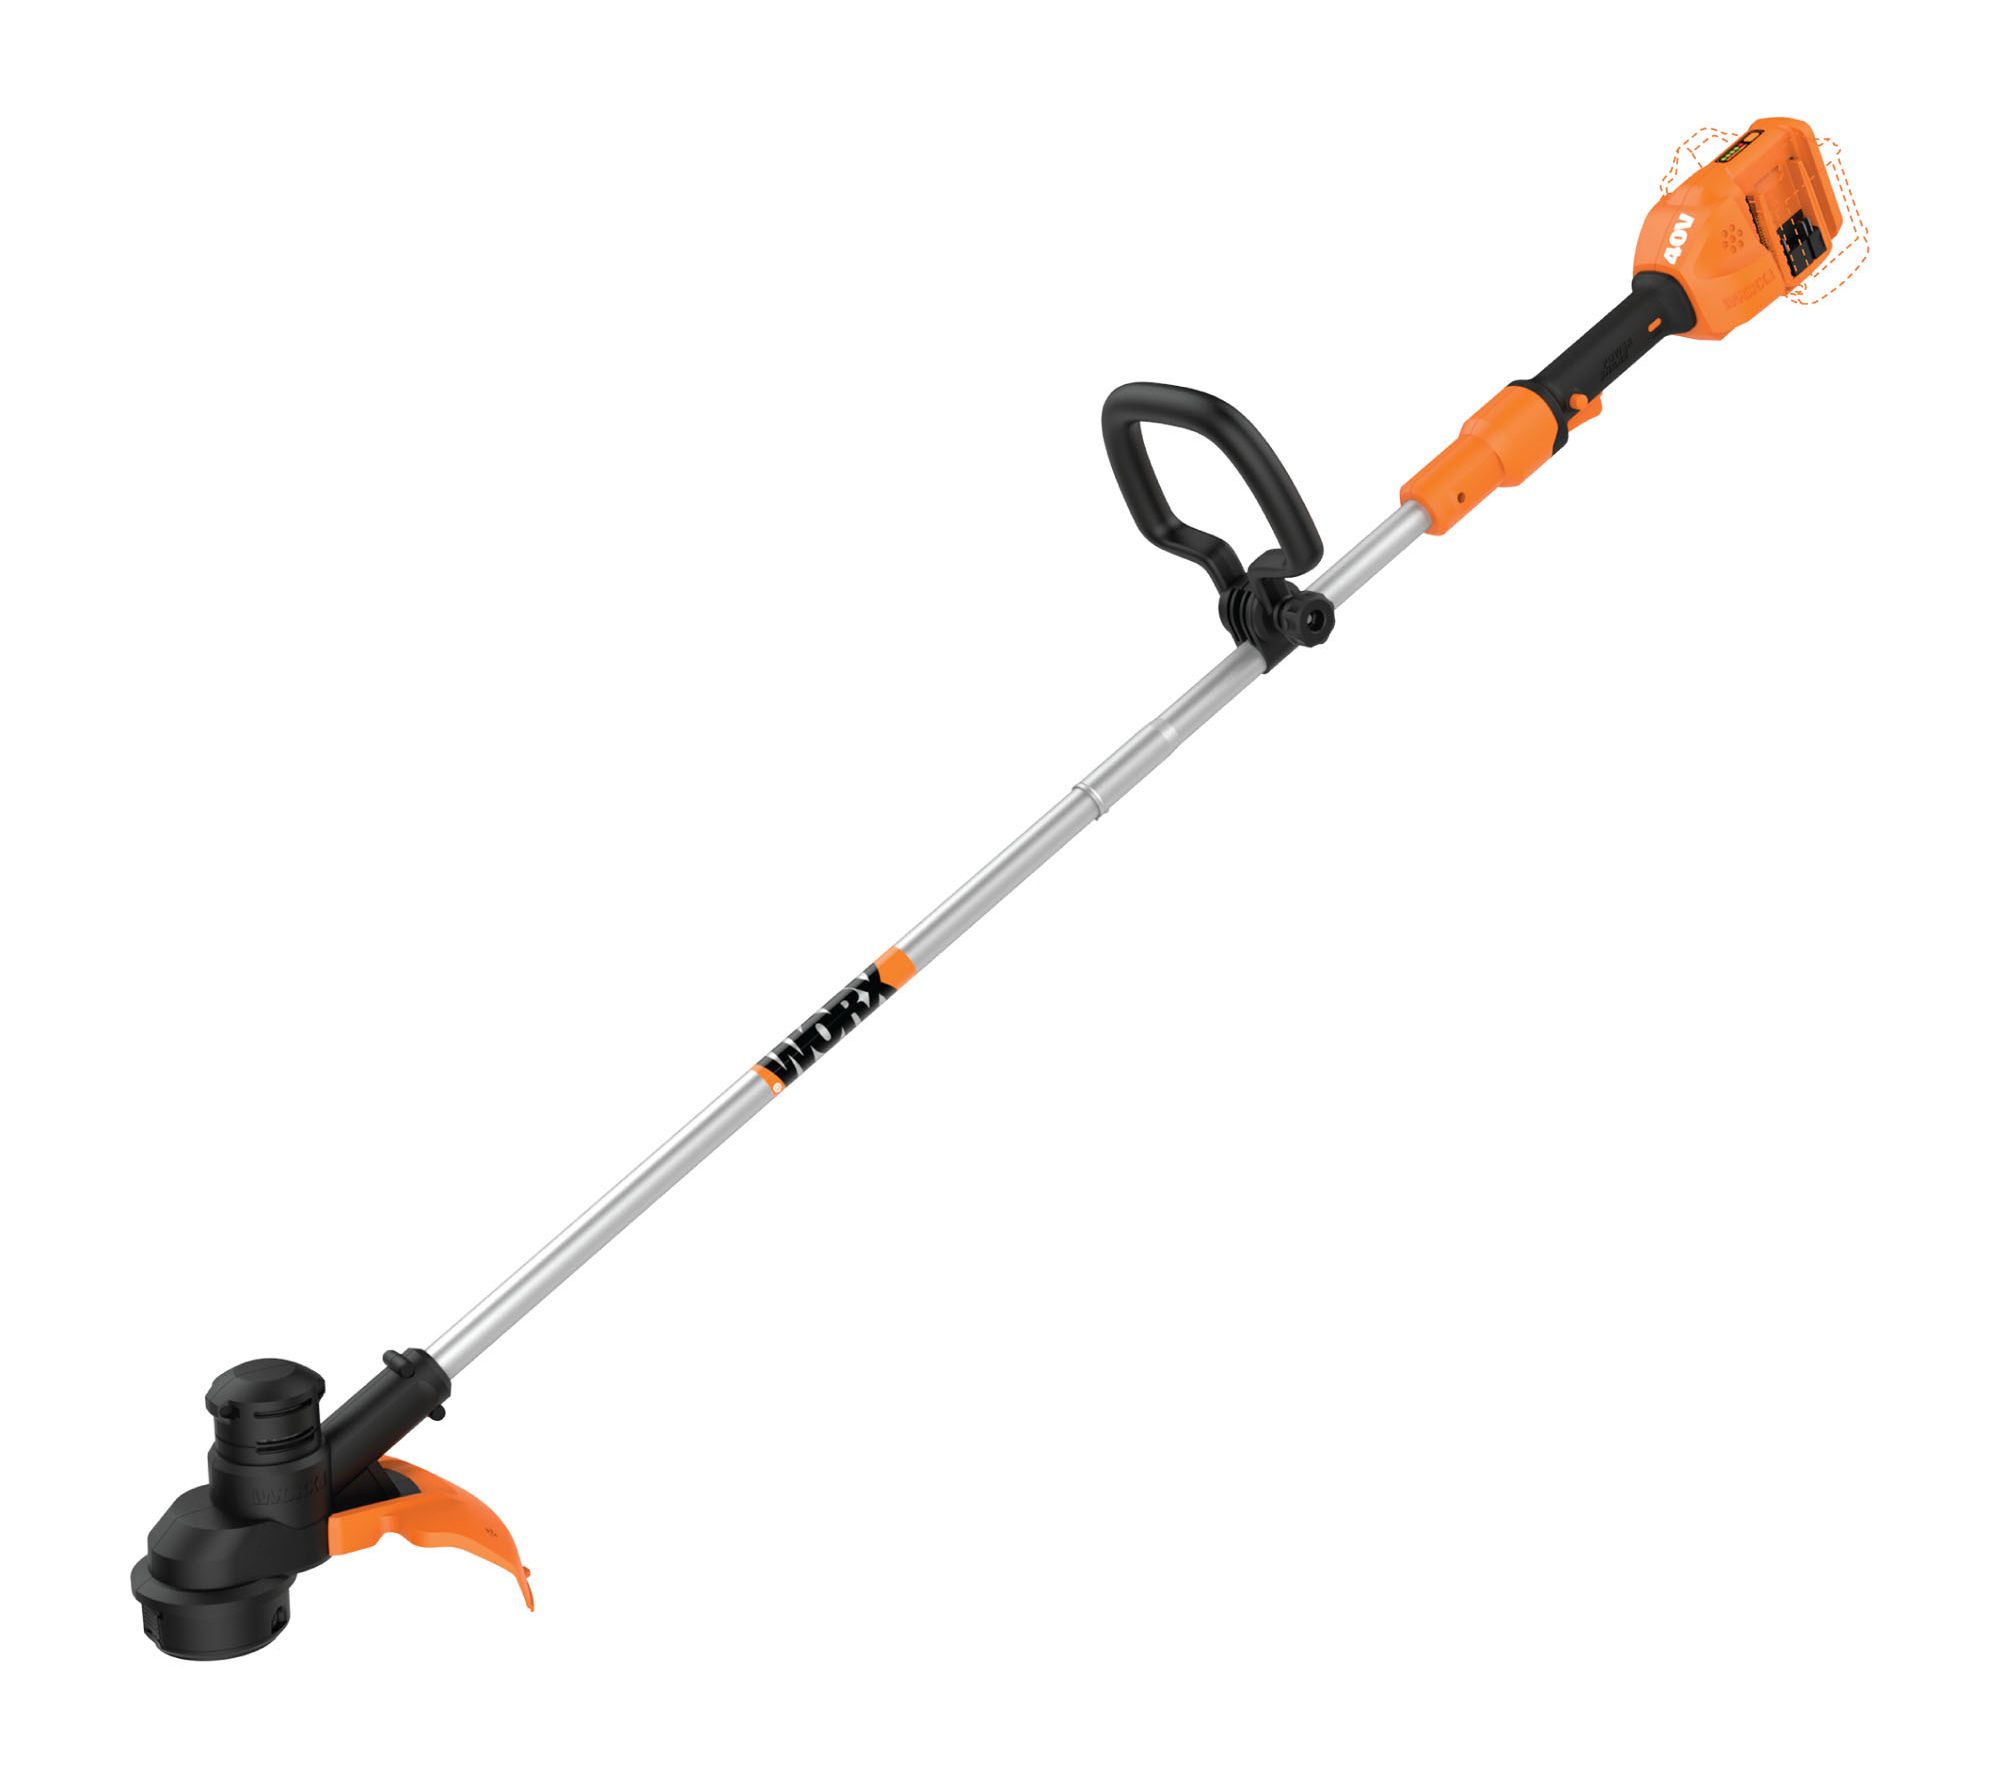 WORX 20V 2-in-1 Attachment Capable Pole Saw w/Battery 